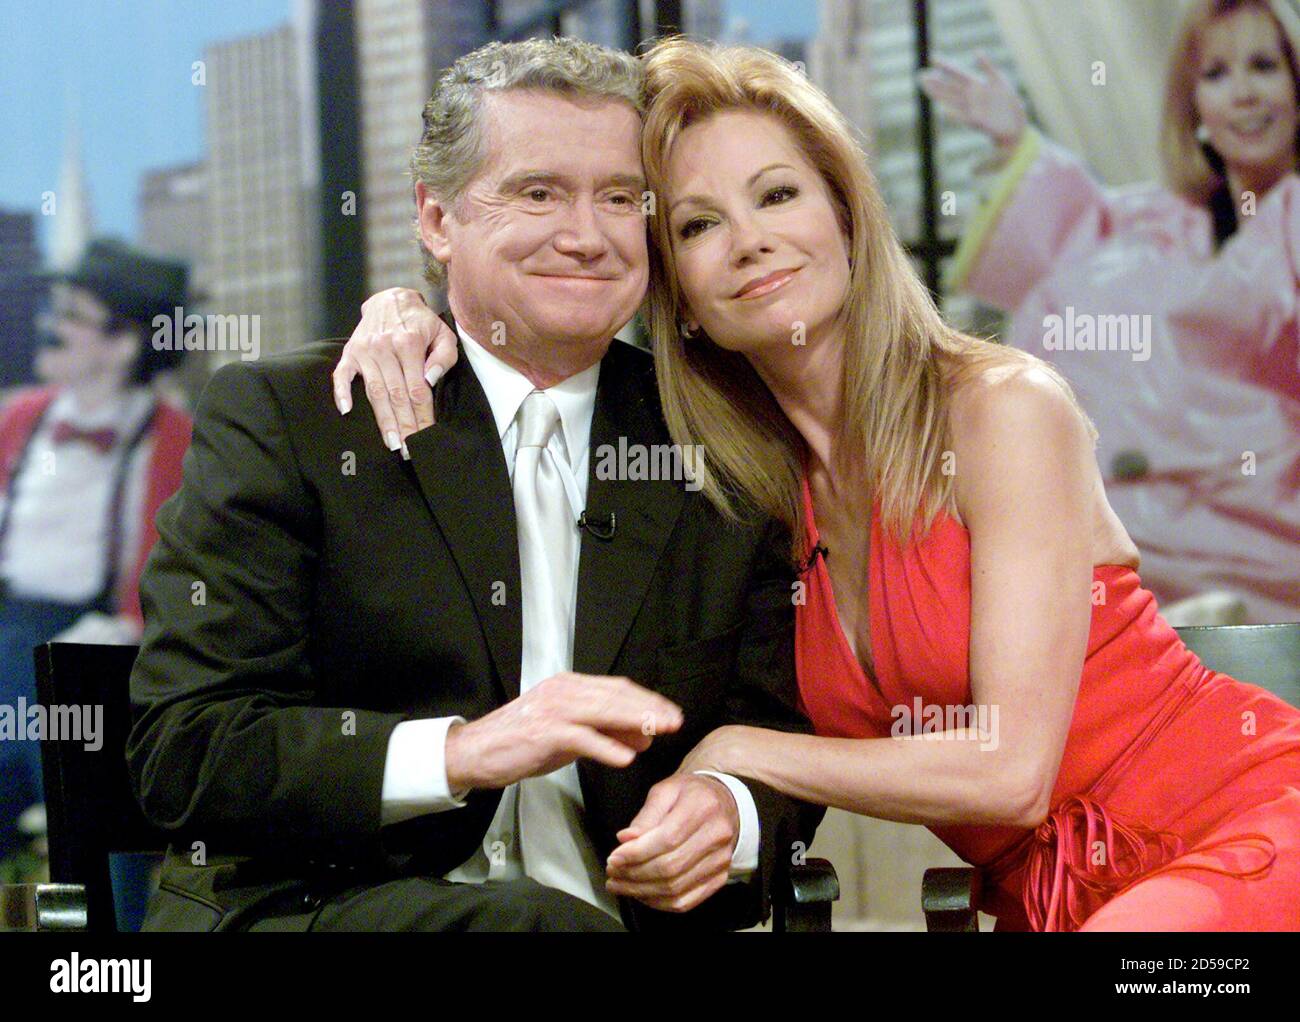 Talk show host Kathie Lee Gifford (R) hugs her co-host Regis Philbin during  Gifford's final appearance on their popular morning show 